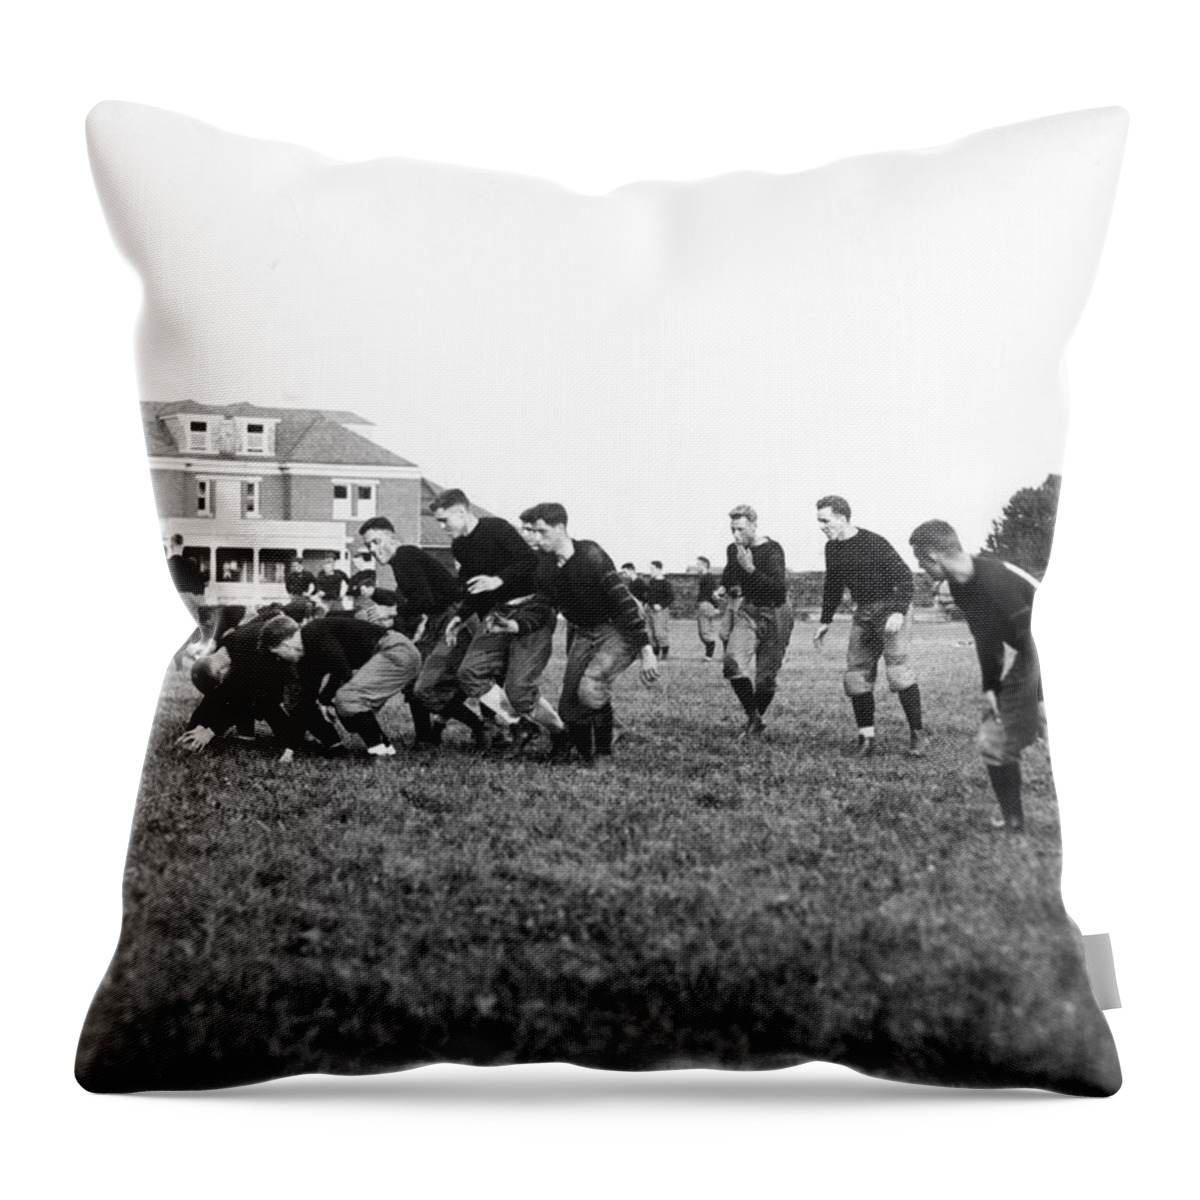 1910s Throw Pillow featuring the photograph Princeton 1912 Football Team by Underwood Archives